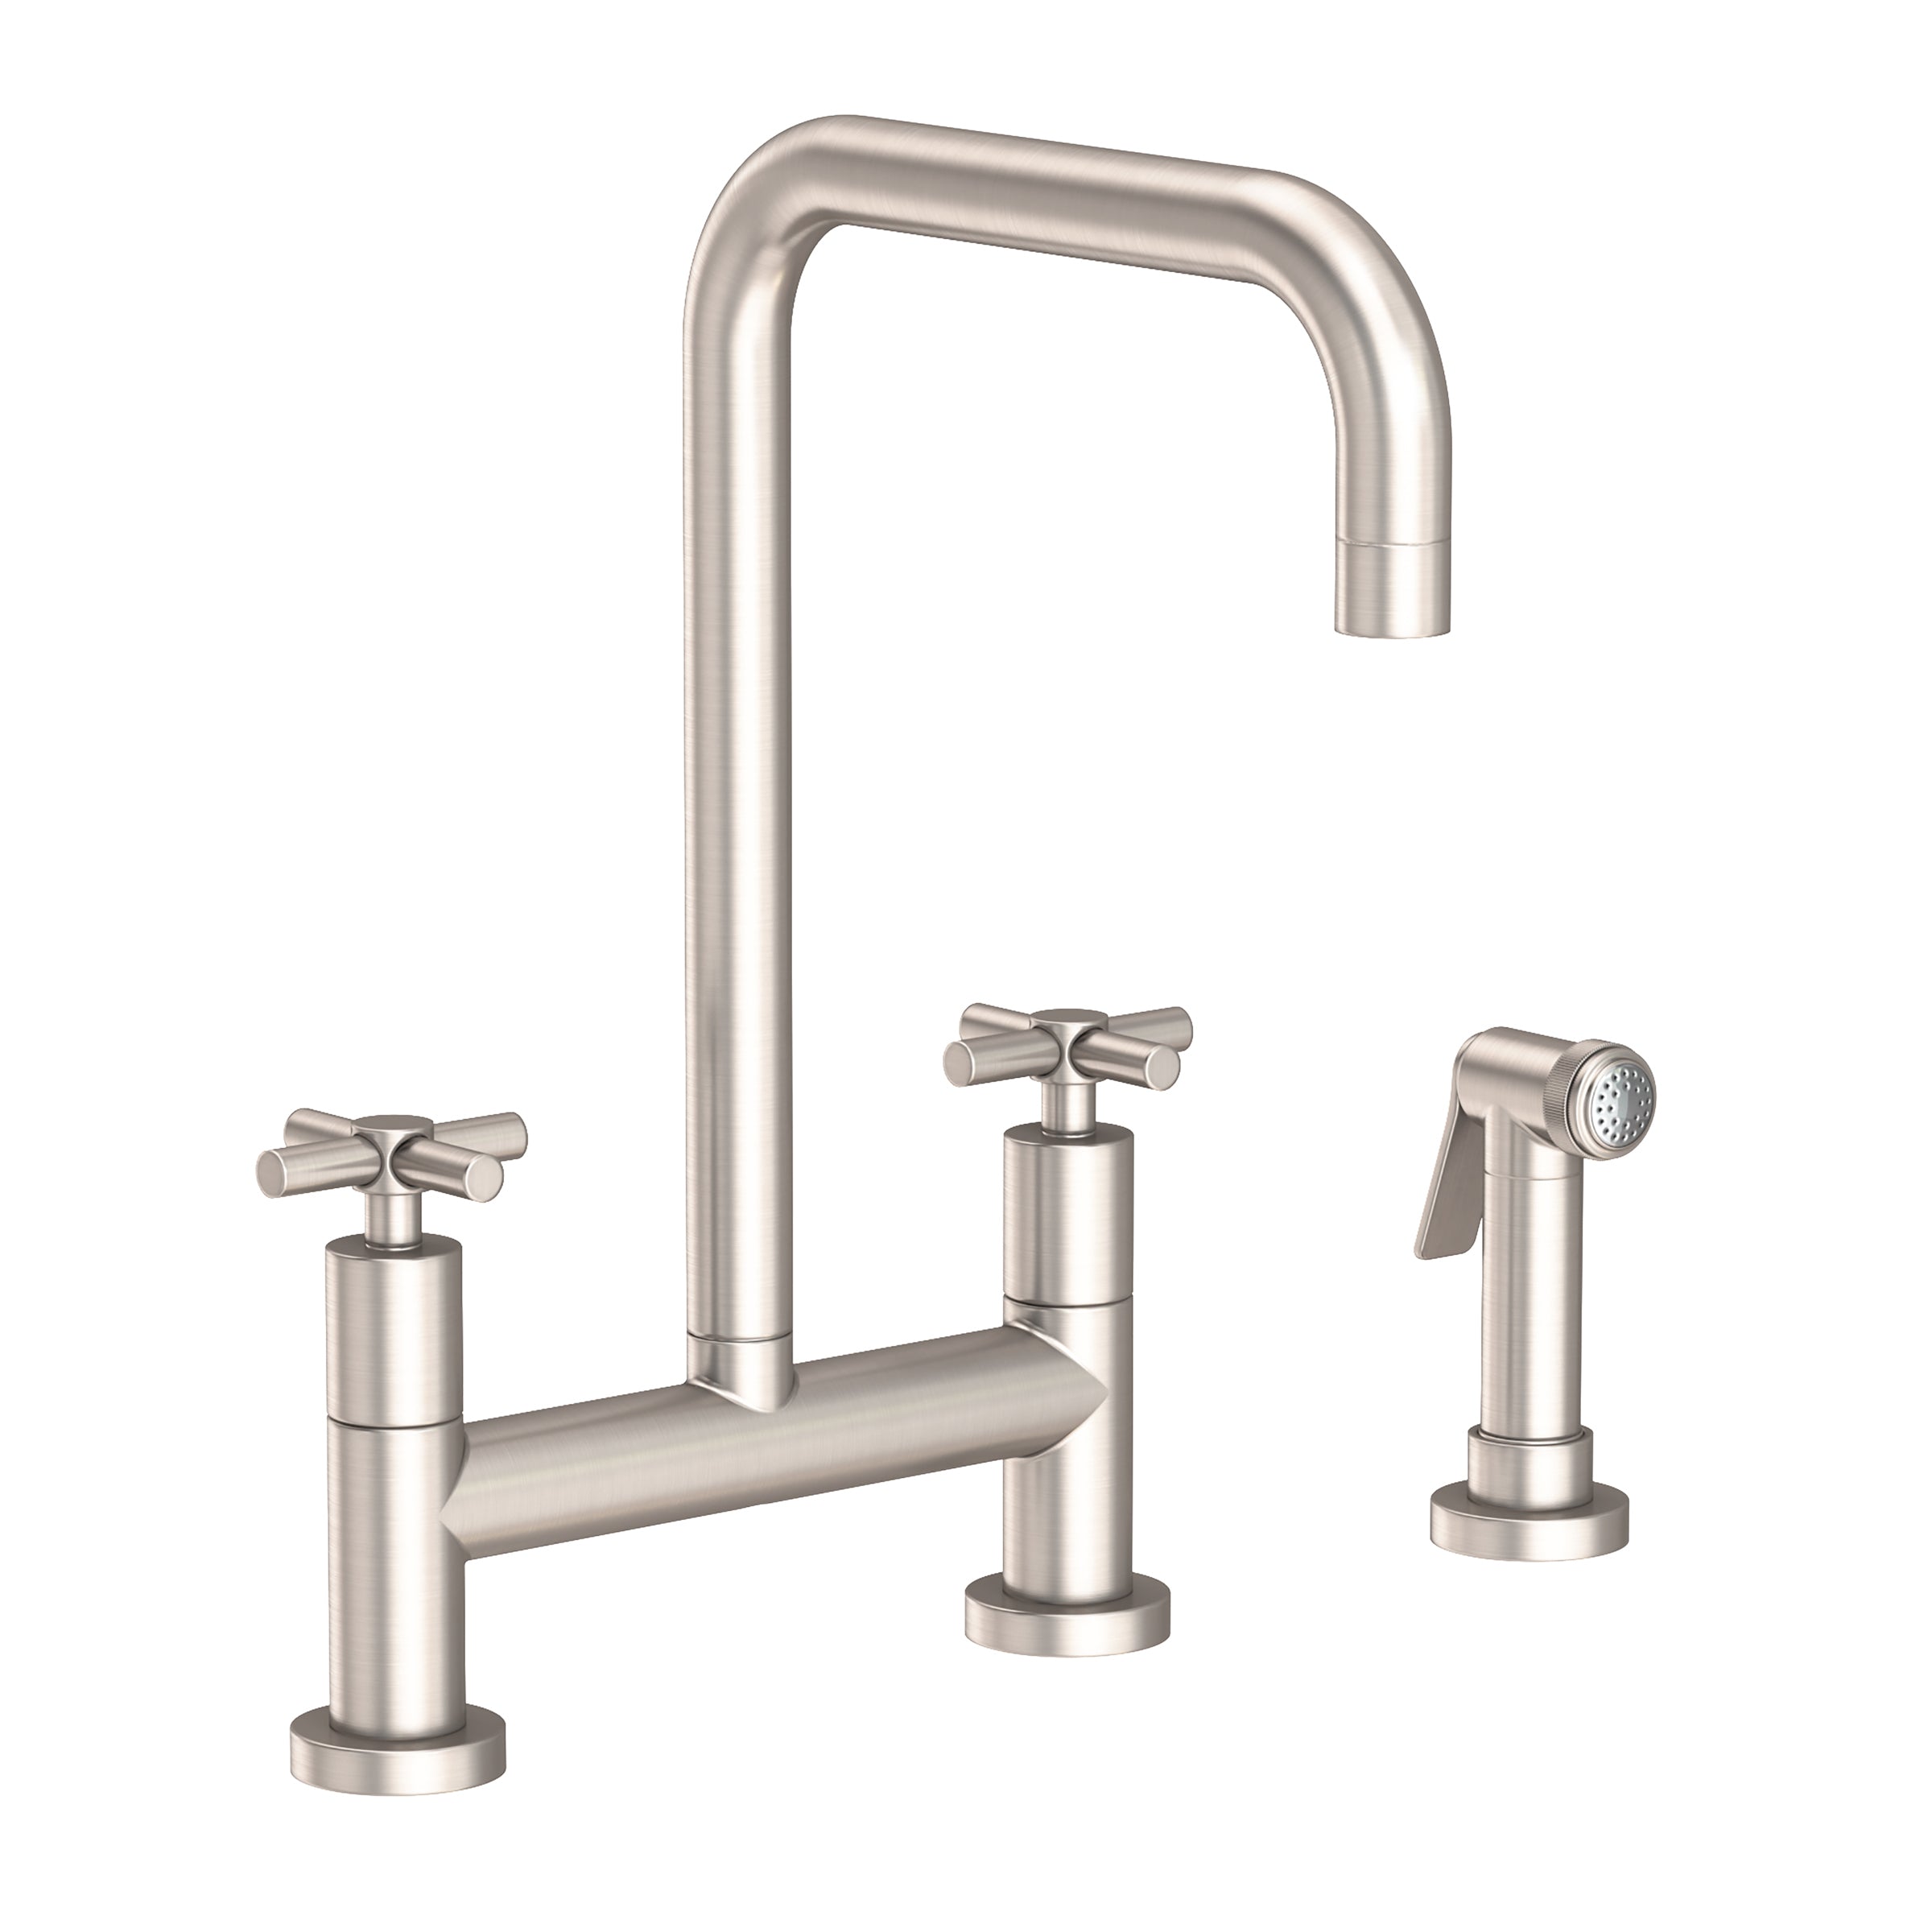 Newport Brass East Square Kitchen Bridge Faucet with Side Spray